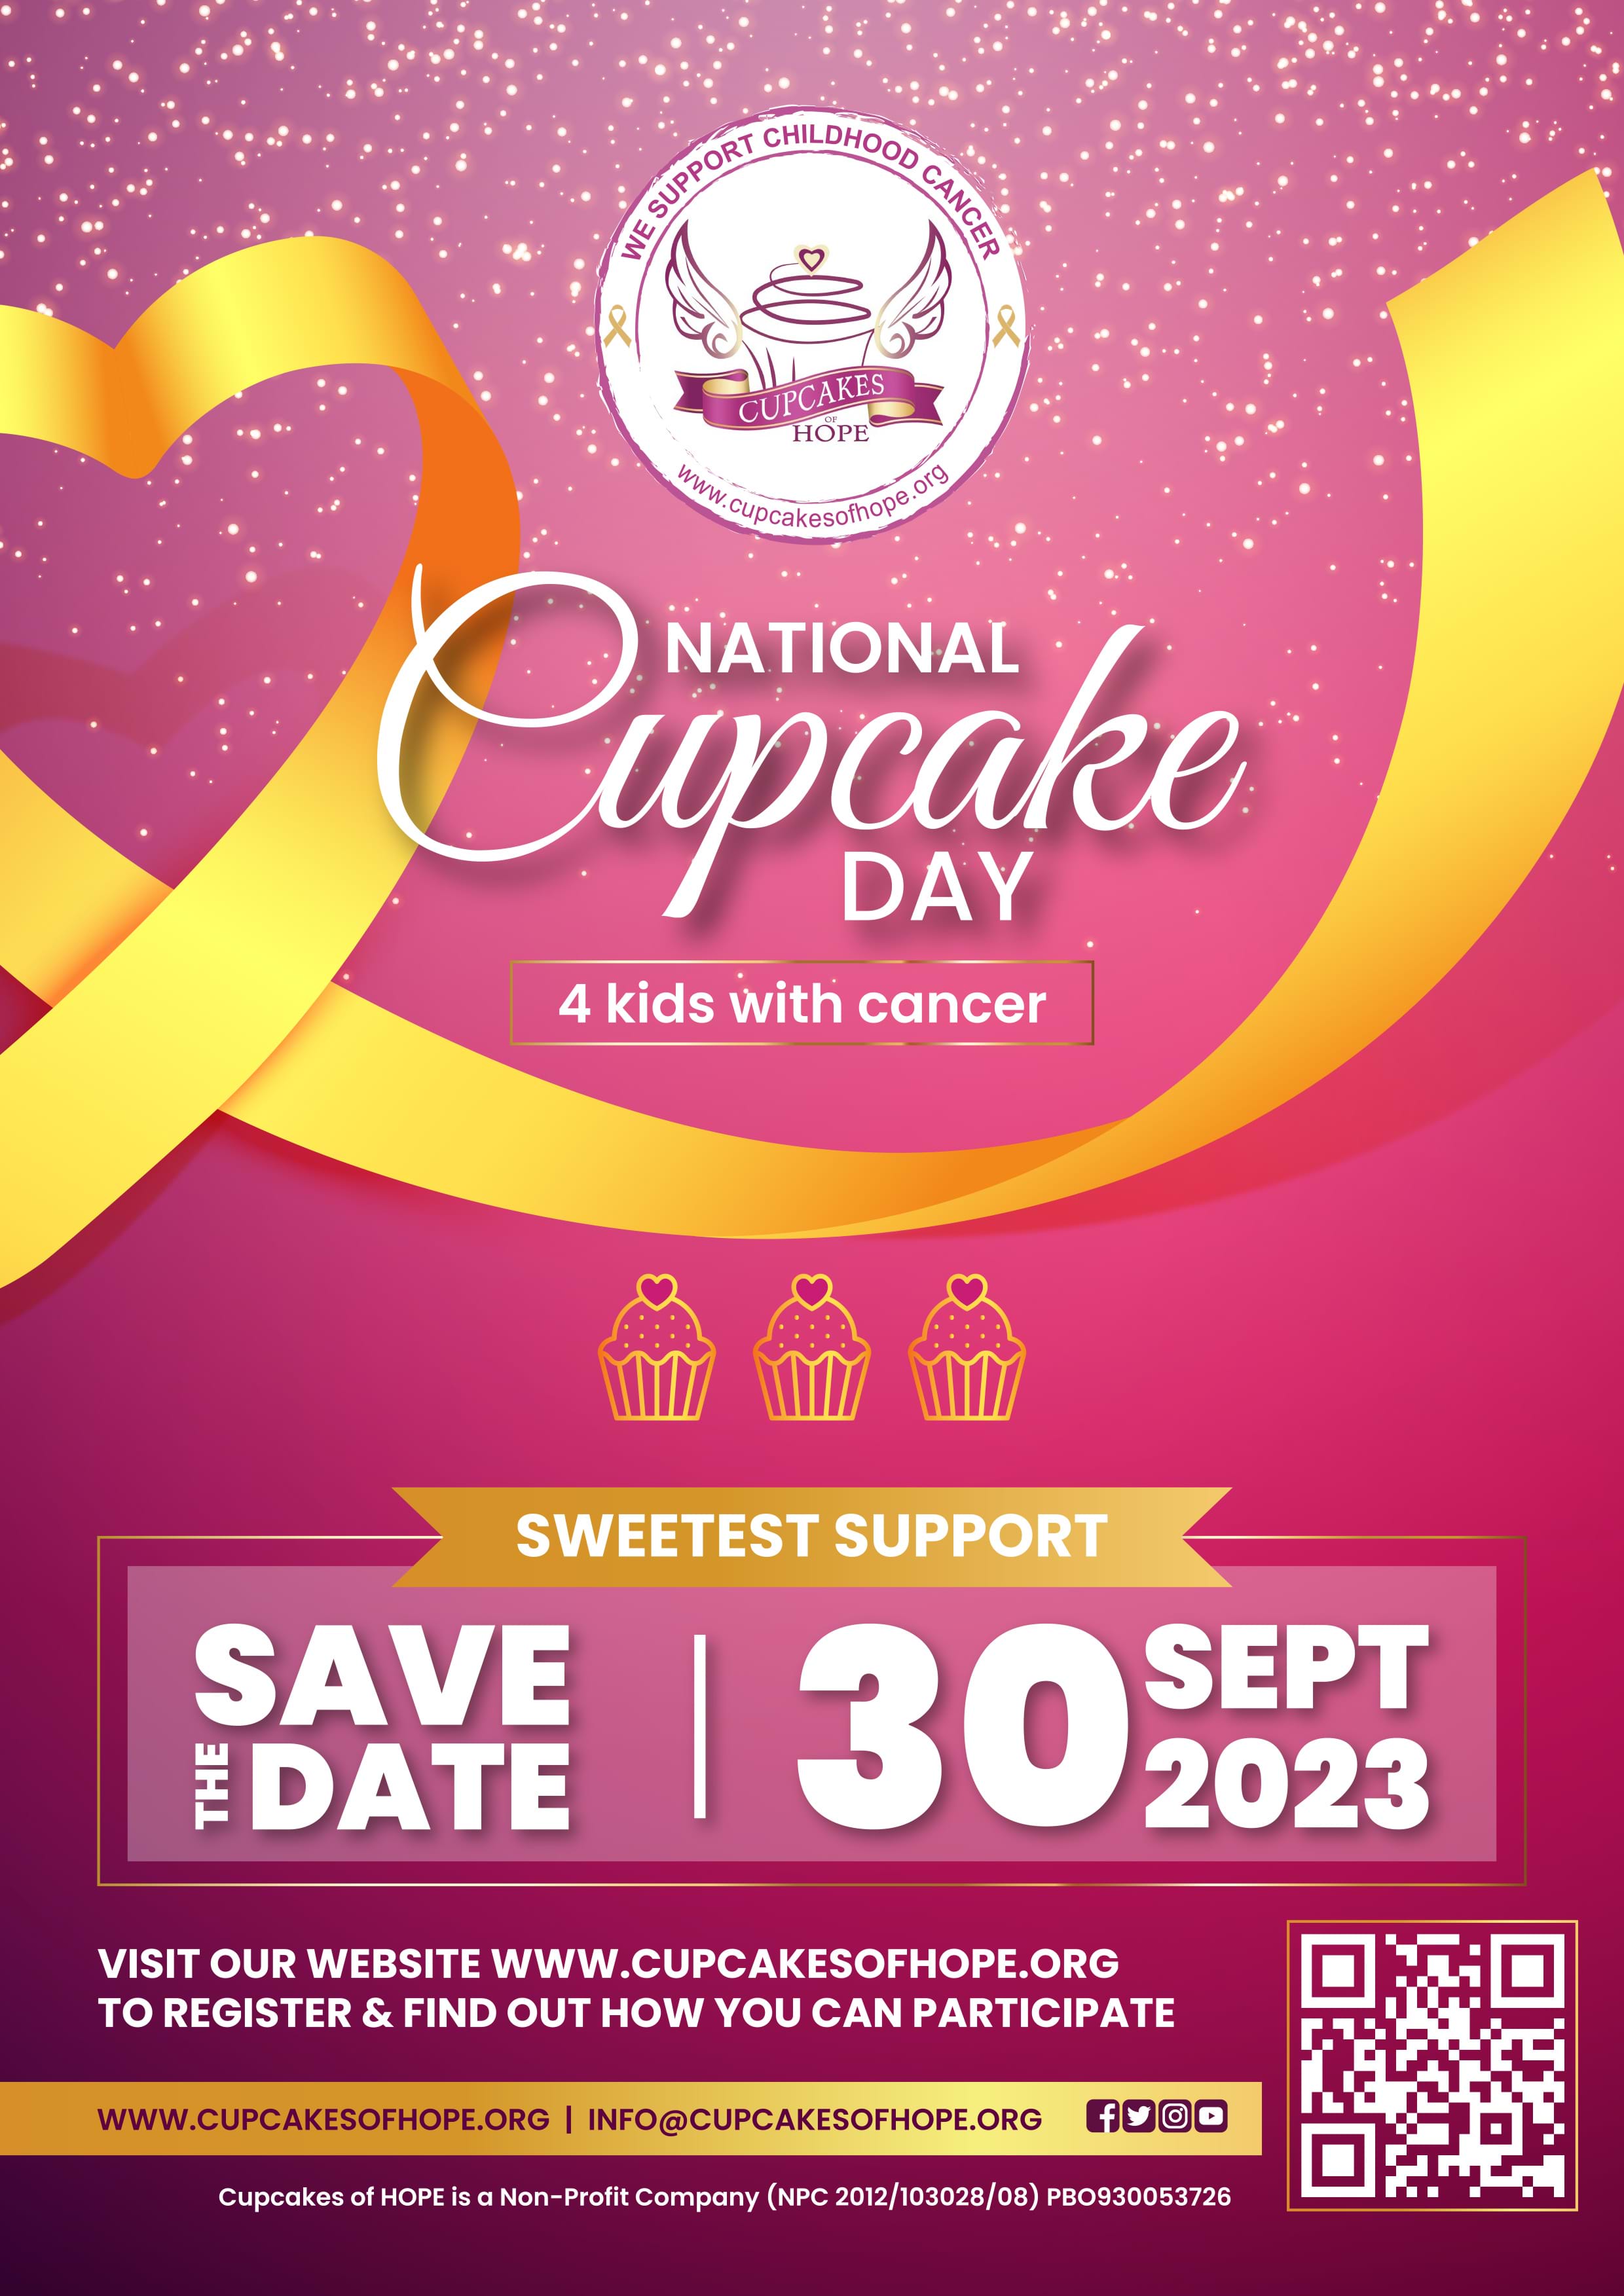 National Cupcake Day - Cupcakes of Hope Fundraising